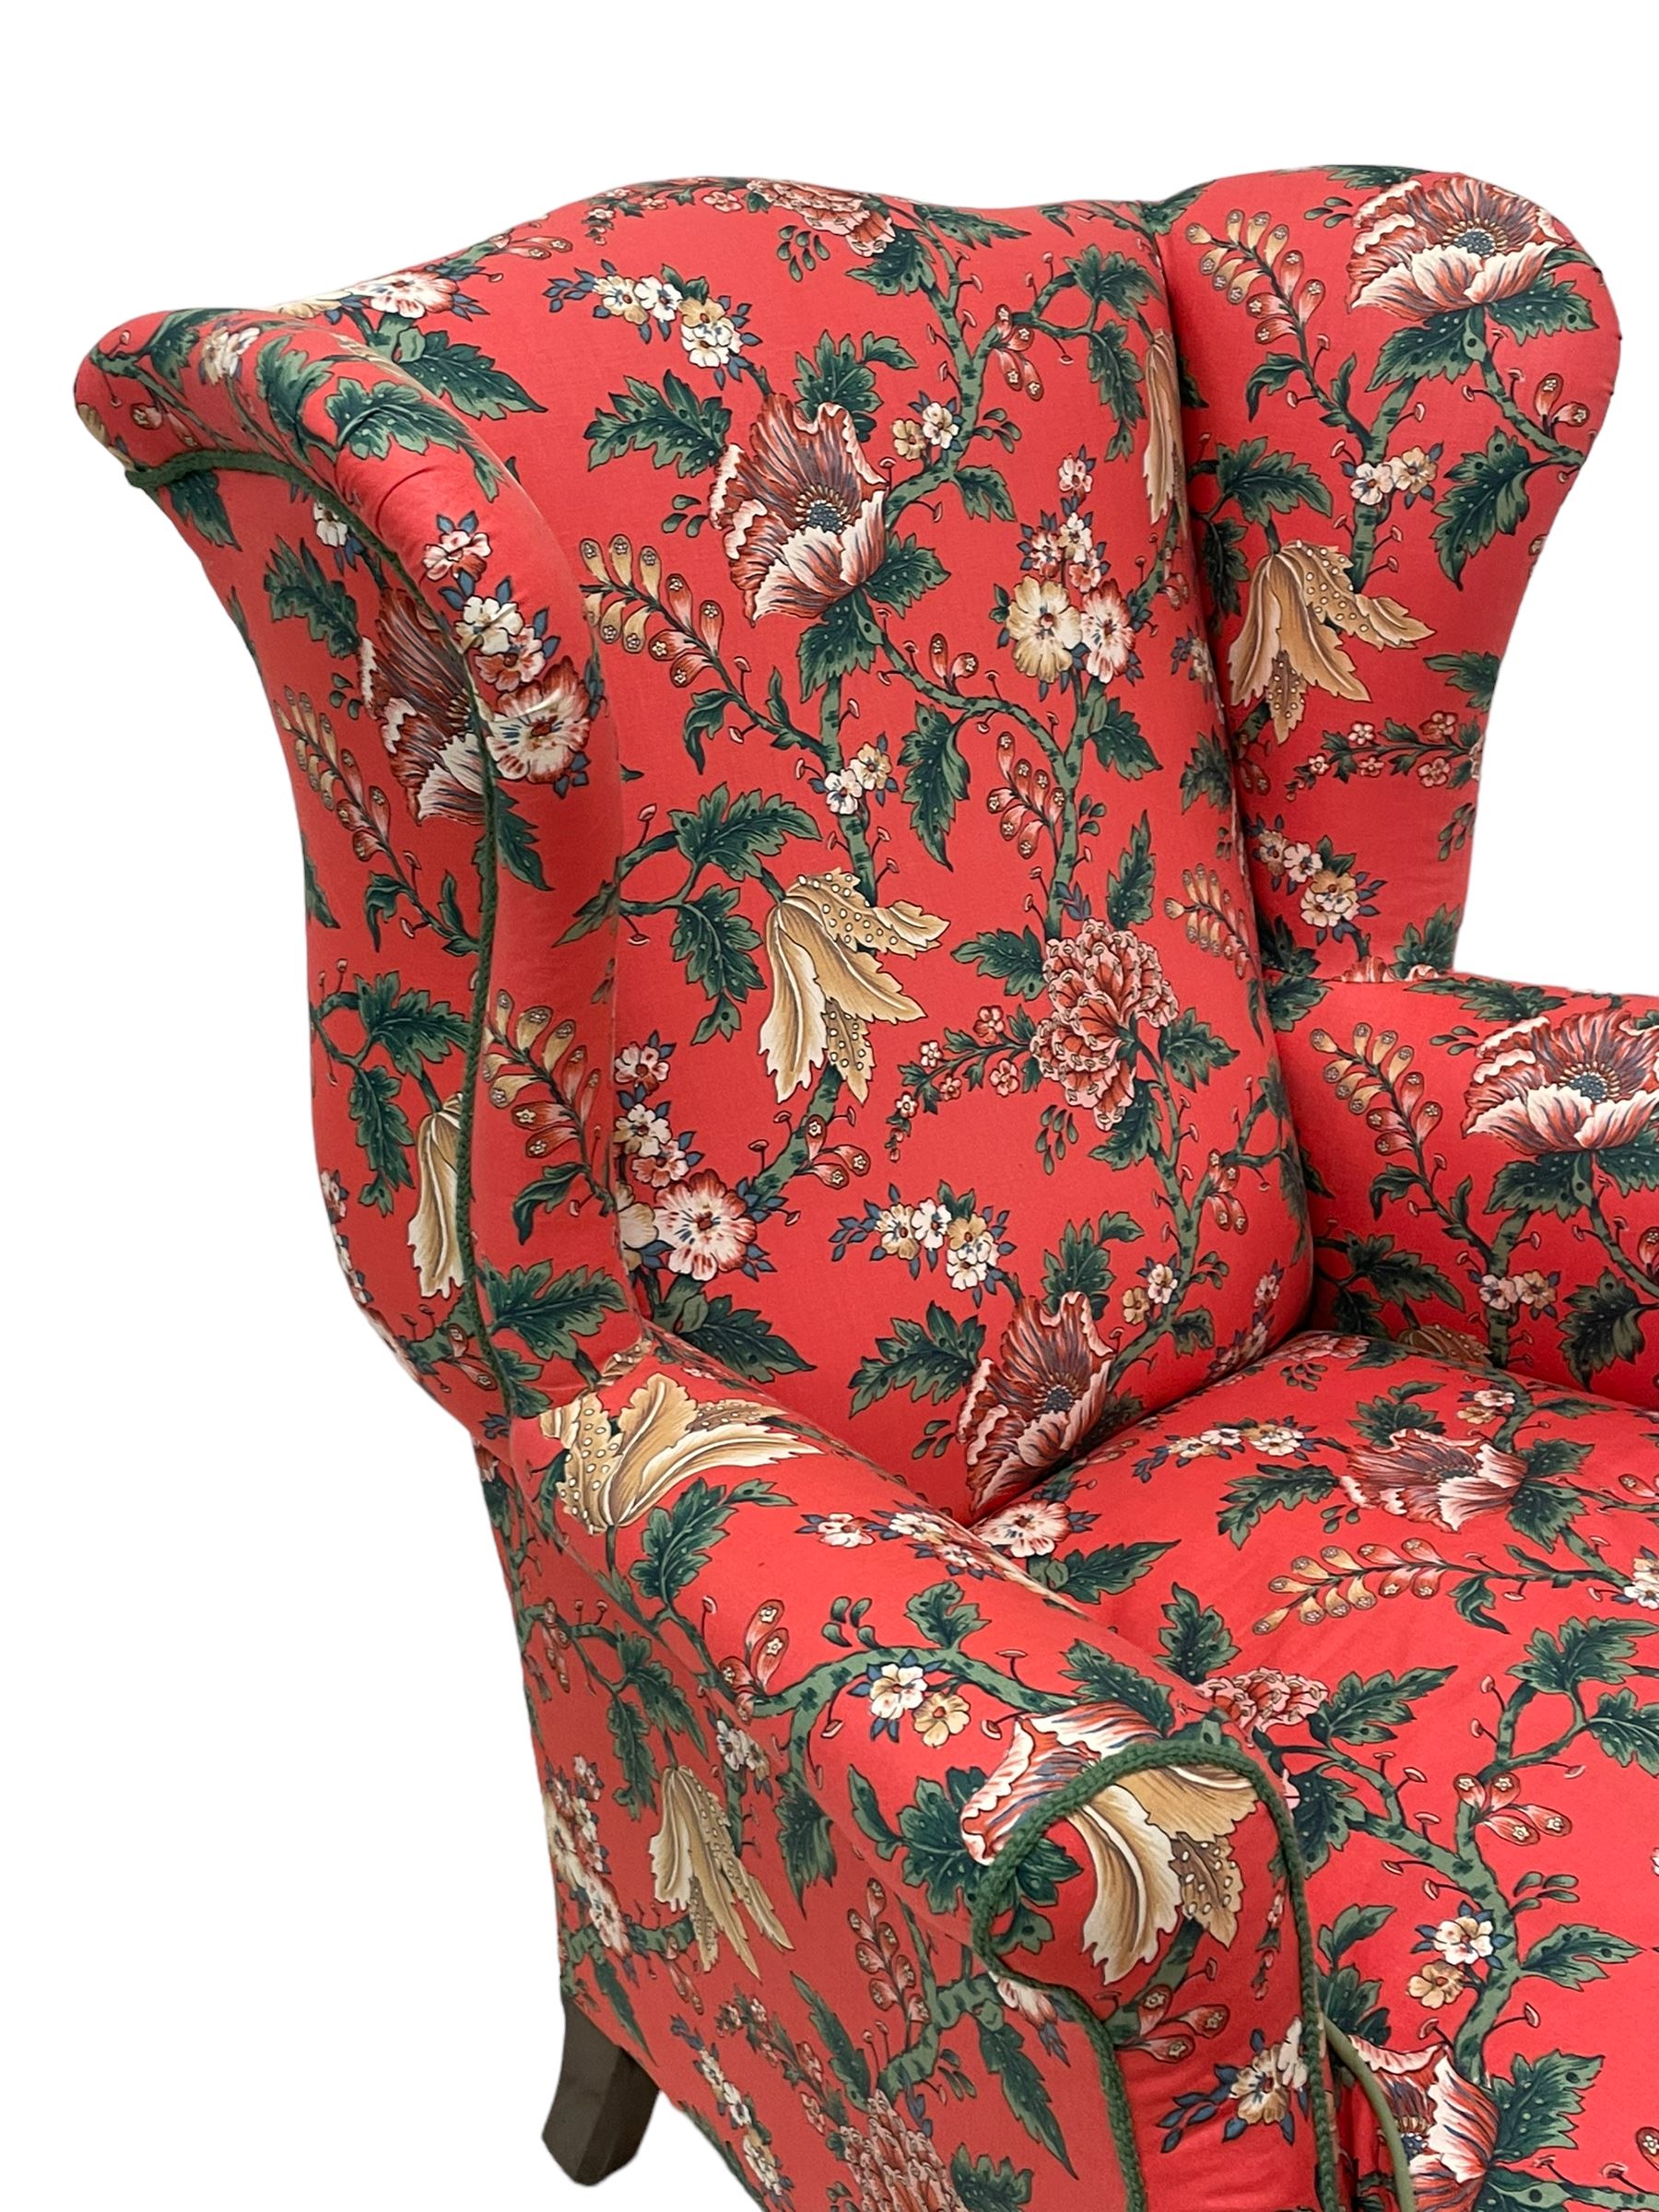 Late 19th to early 20th century wingback armchair - Image 2 of 9